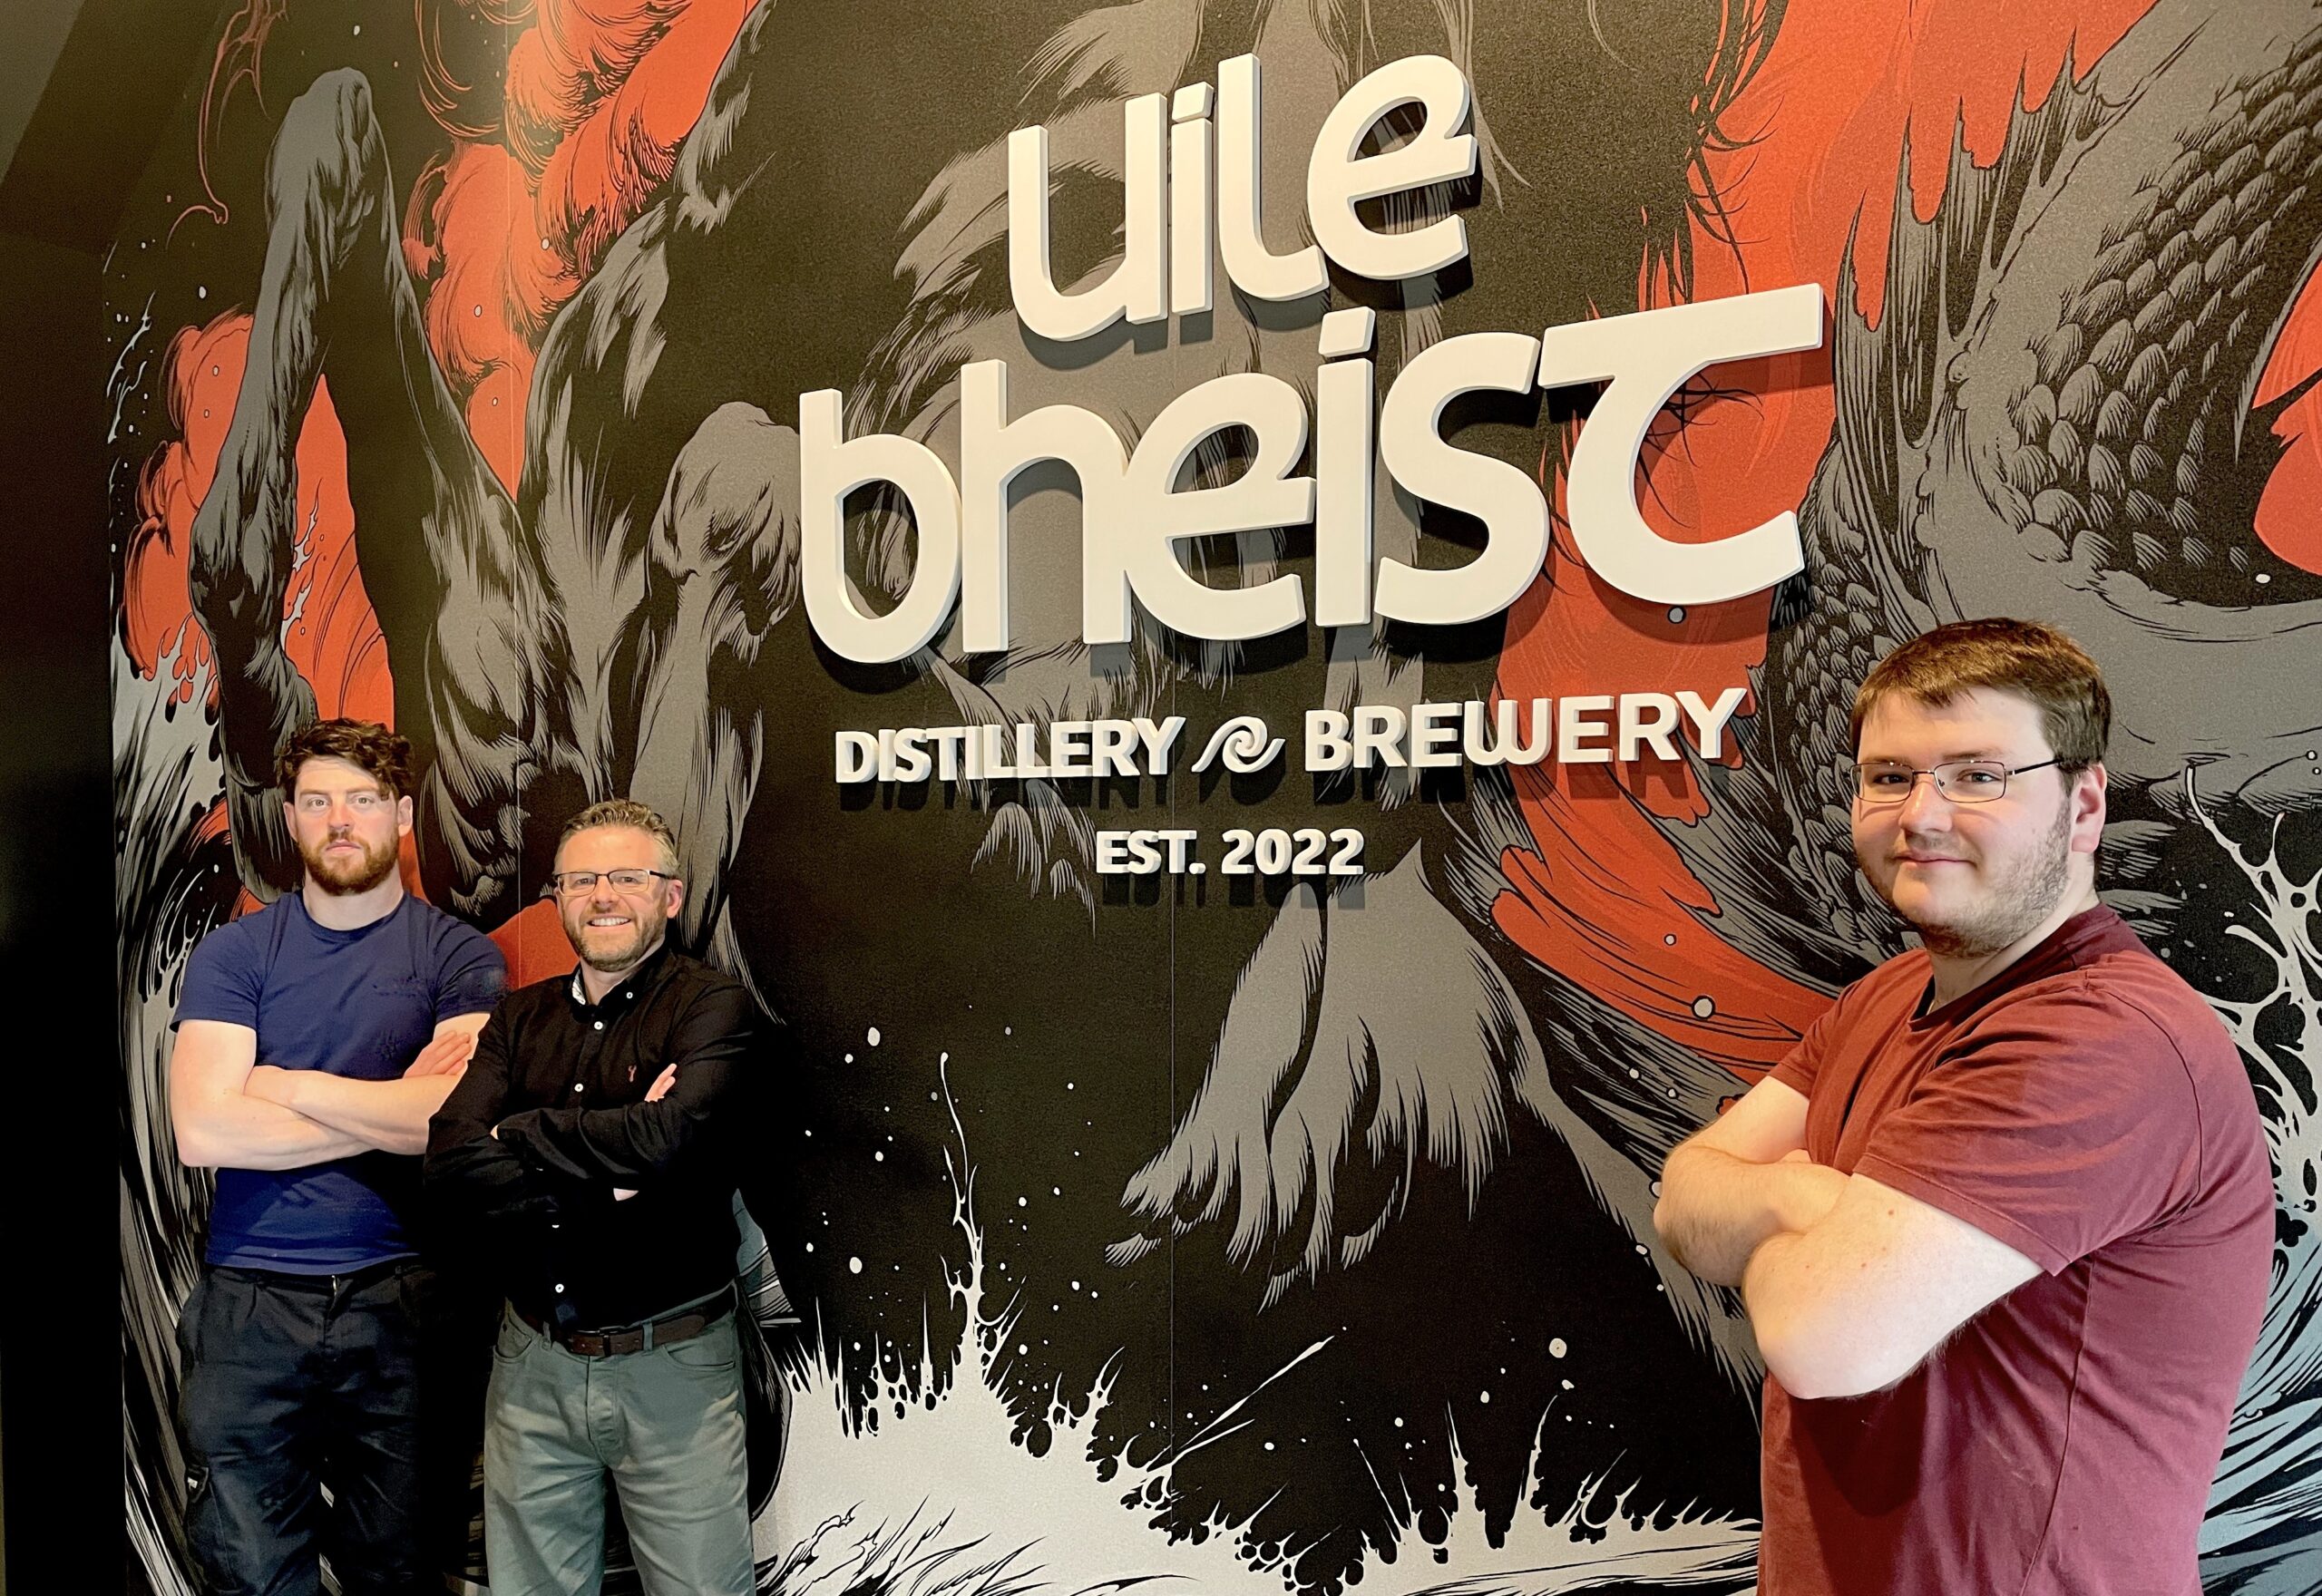 Donnie Christian, Andrew Shearer and Andrew Hodgson, have taken up new roles at Uile-bheist Distillery and Brewer.